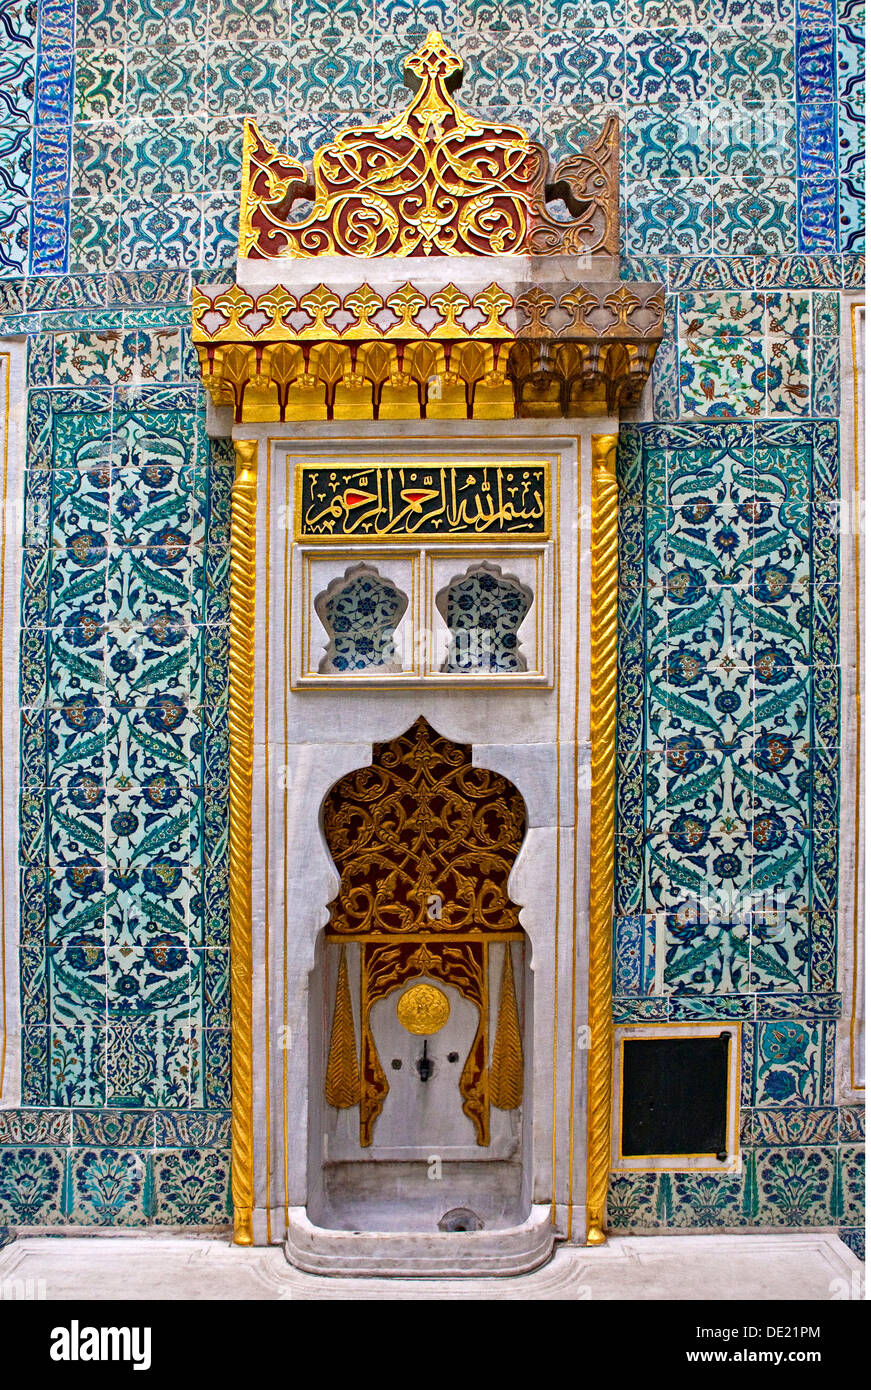 fine arts, Byzantine Empire, fountain with ornament in the harem of the Topkapi Palace, Istanbul, Artist's Copyright has not to be cleared Stock Photo